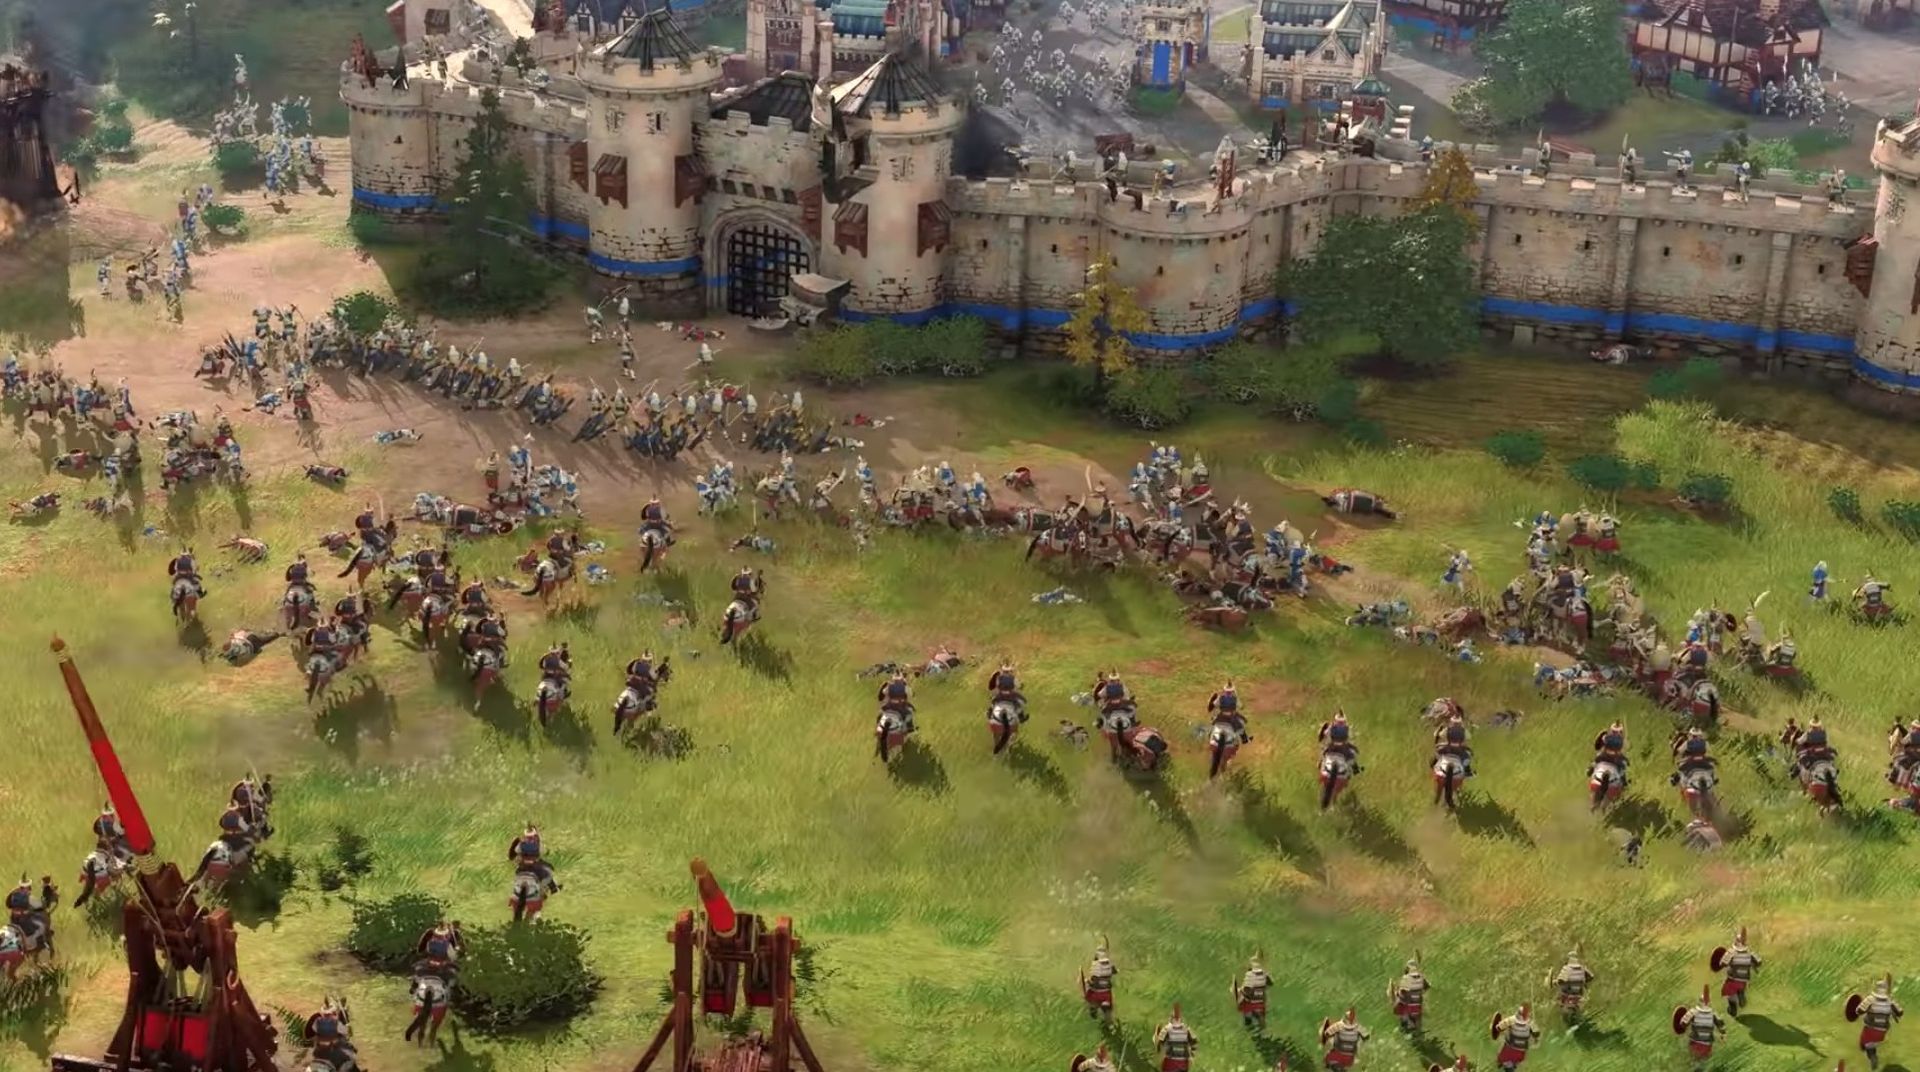 Age Of Empires 4 Gameplay Trailer Shows Off Beautiful Medieval Rts Warfare Techradar 3592